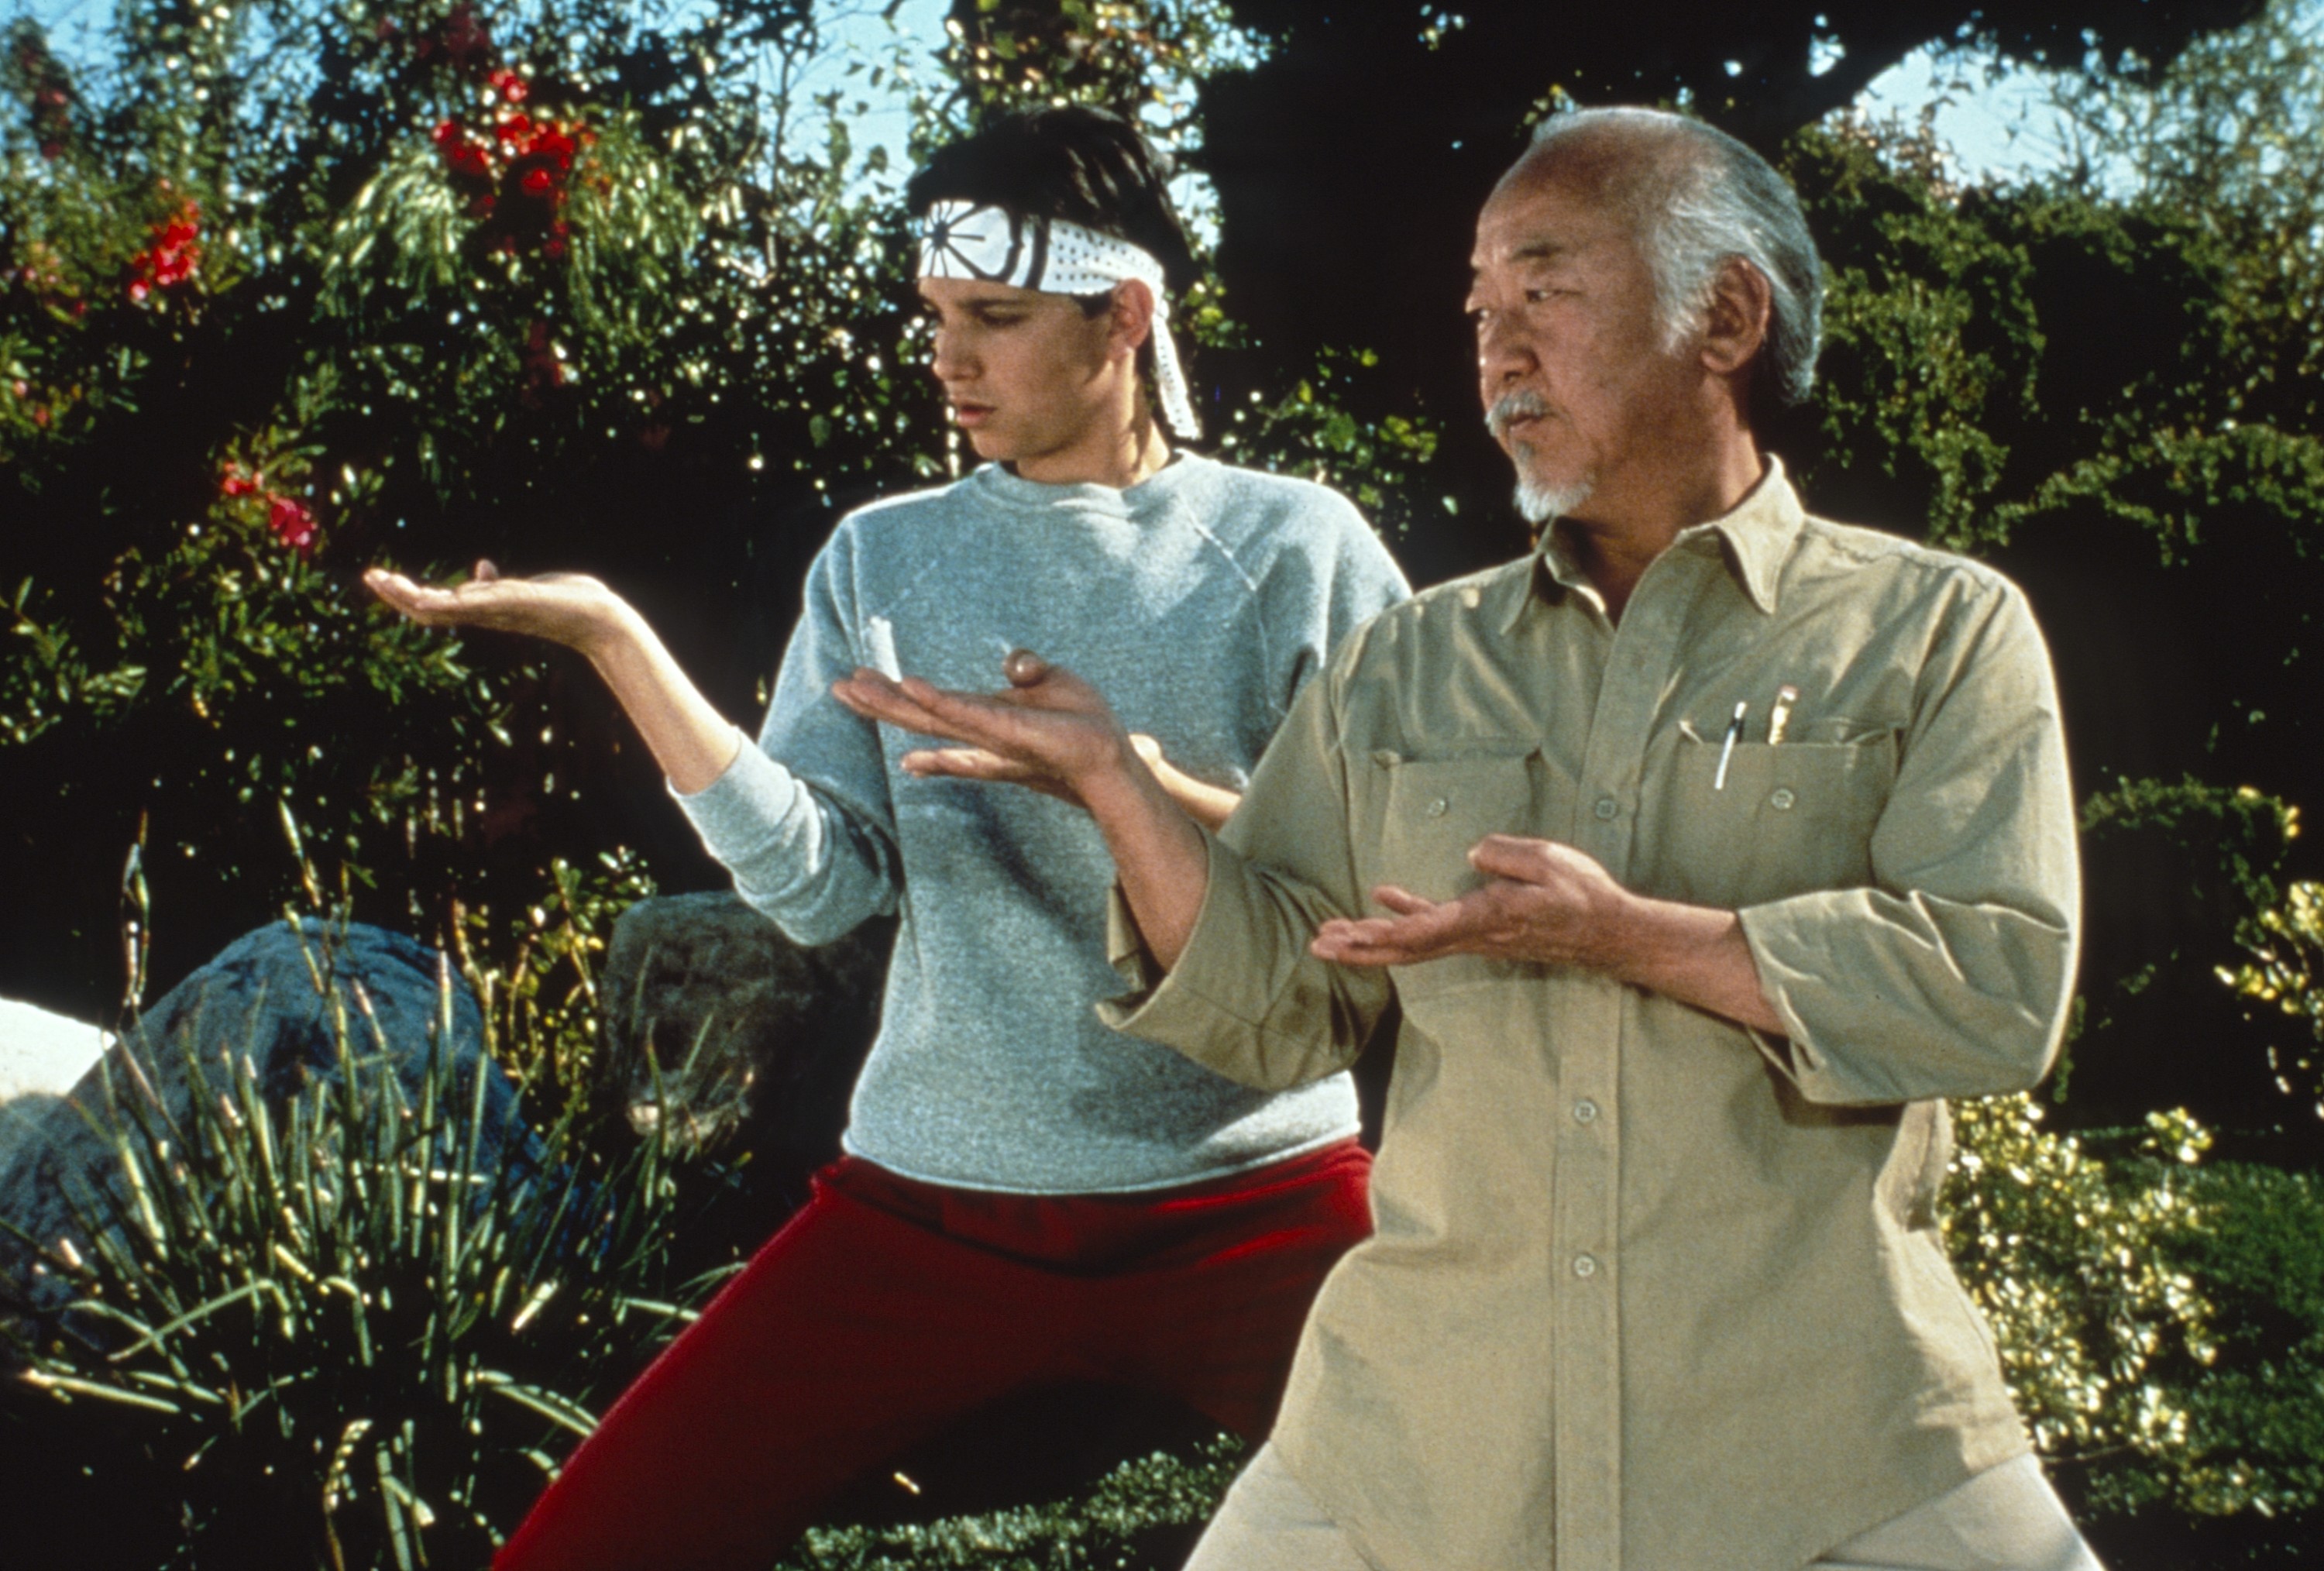 'THE KARATE KID, PART III', from left: Ralph Macchio, Pat Morita, 1989. ©Columbia Pictures / Courtesy Everett Collection